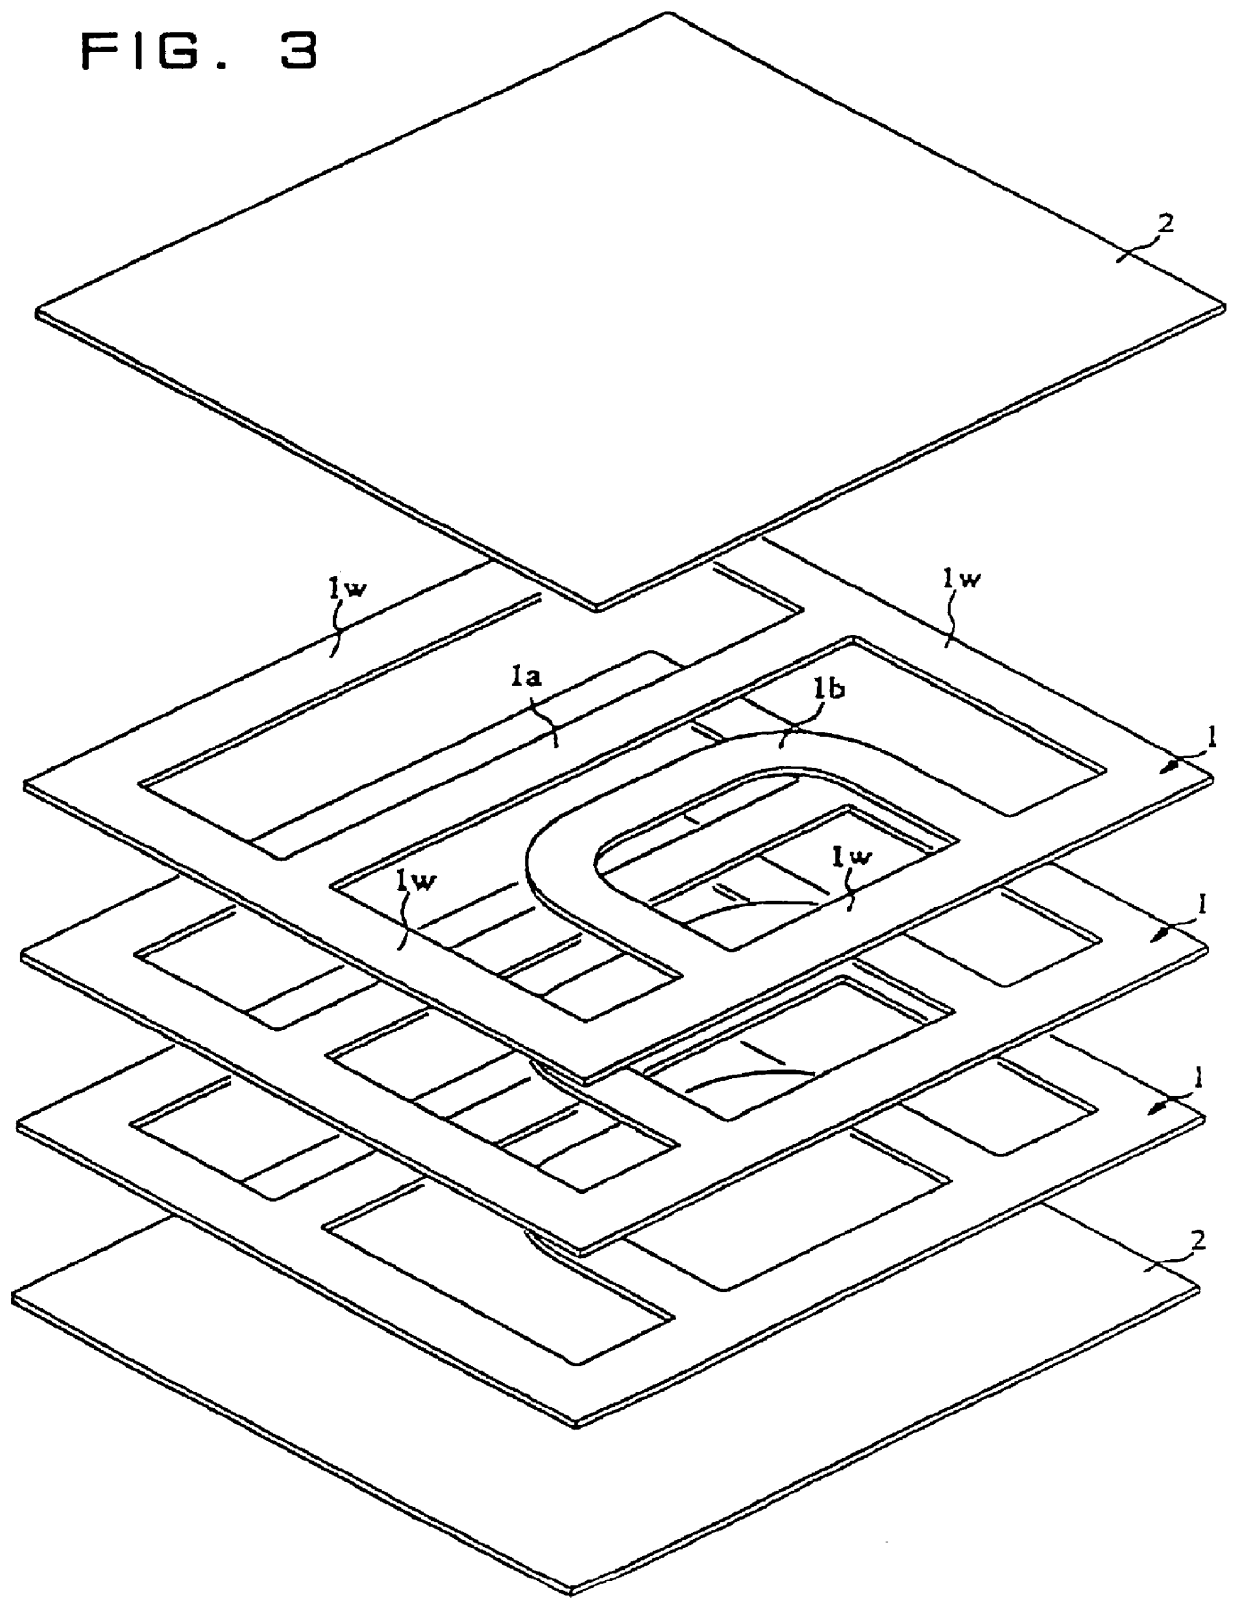 Dielectric waveguide of a laminated structure